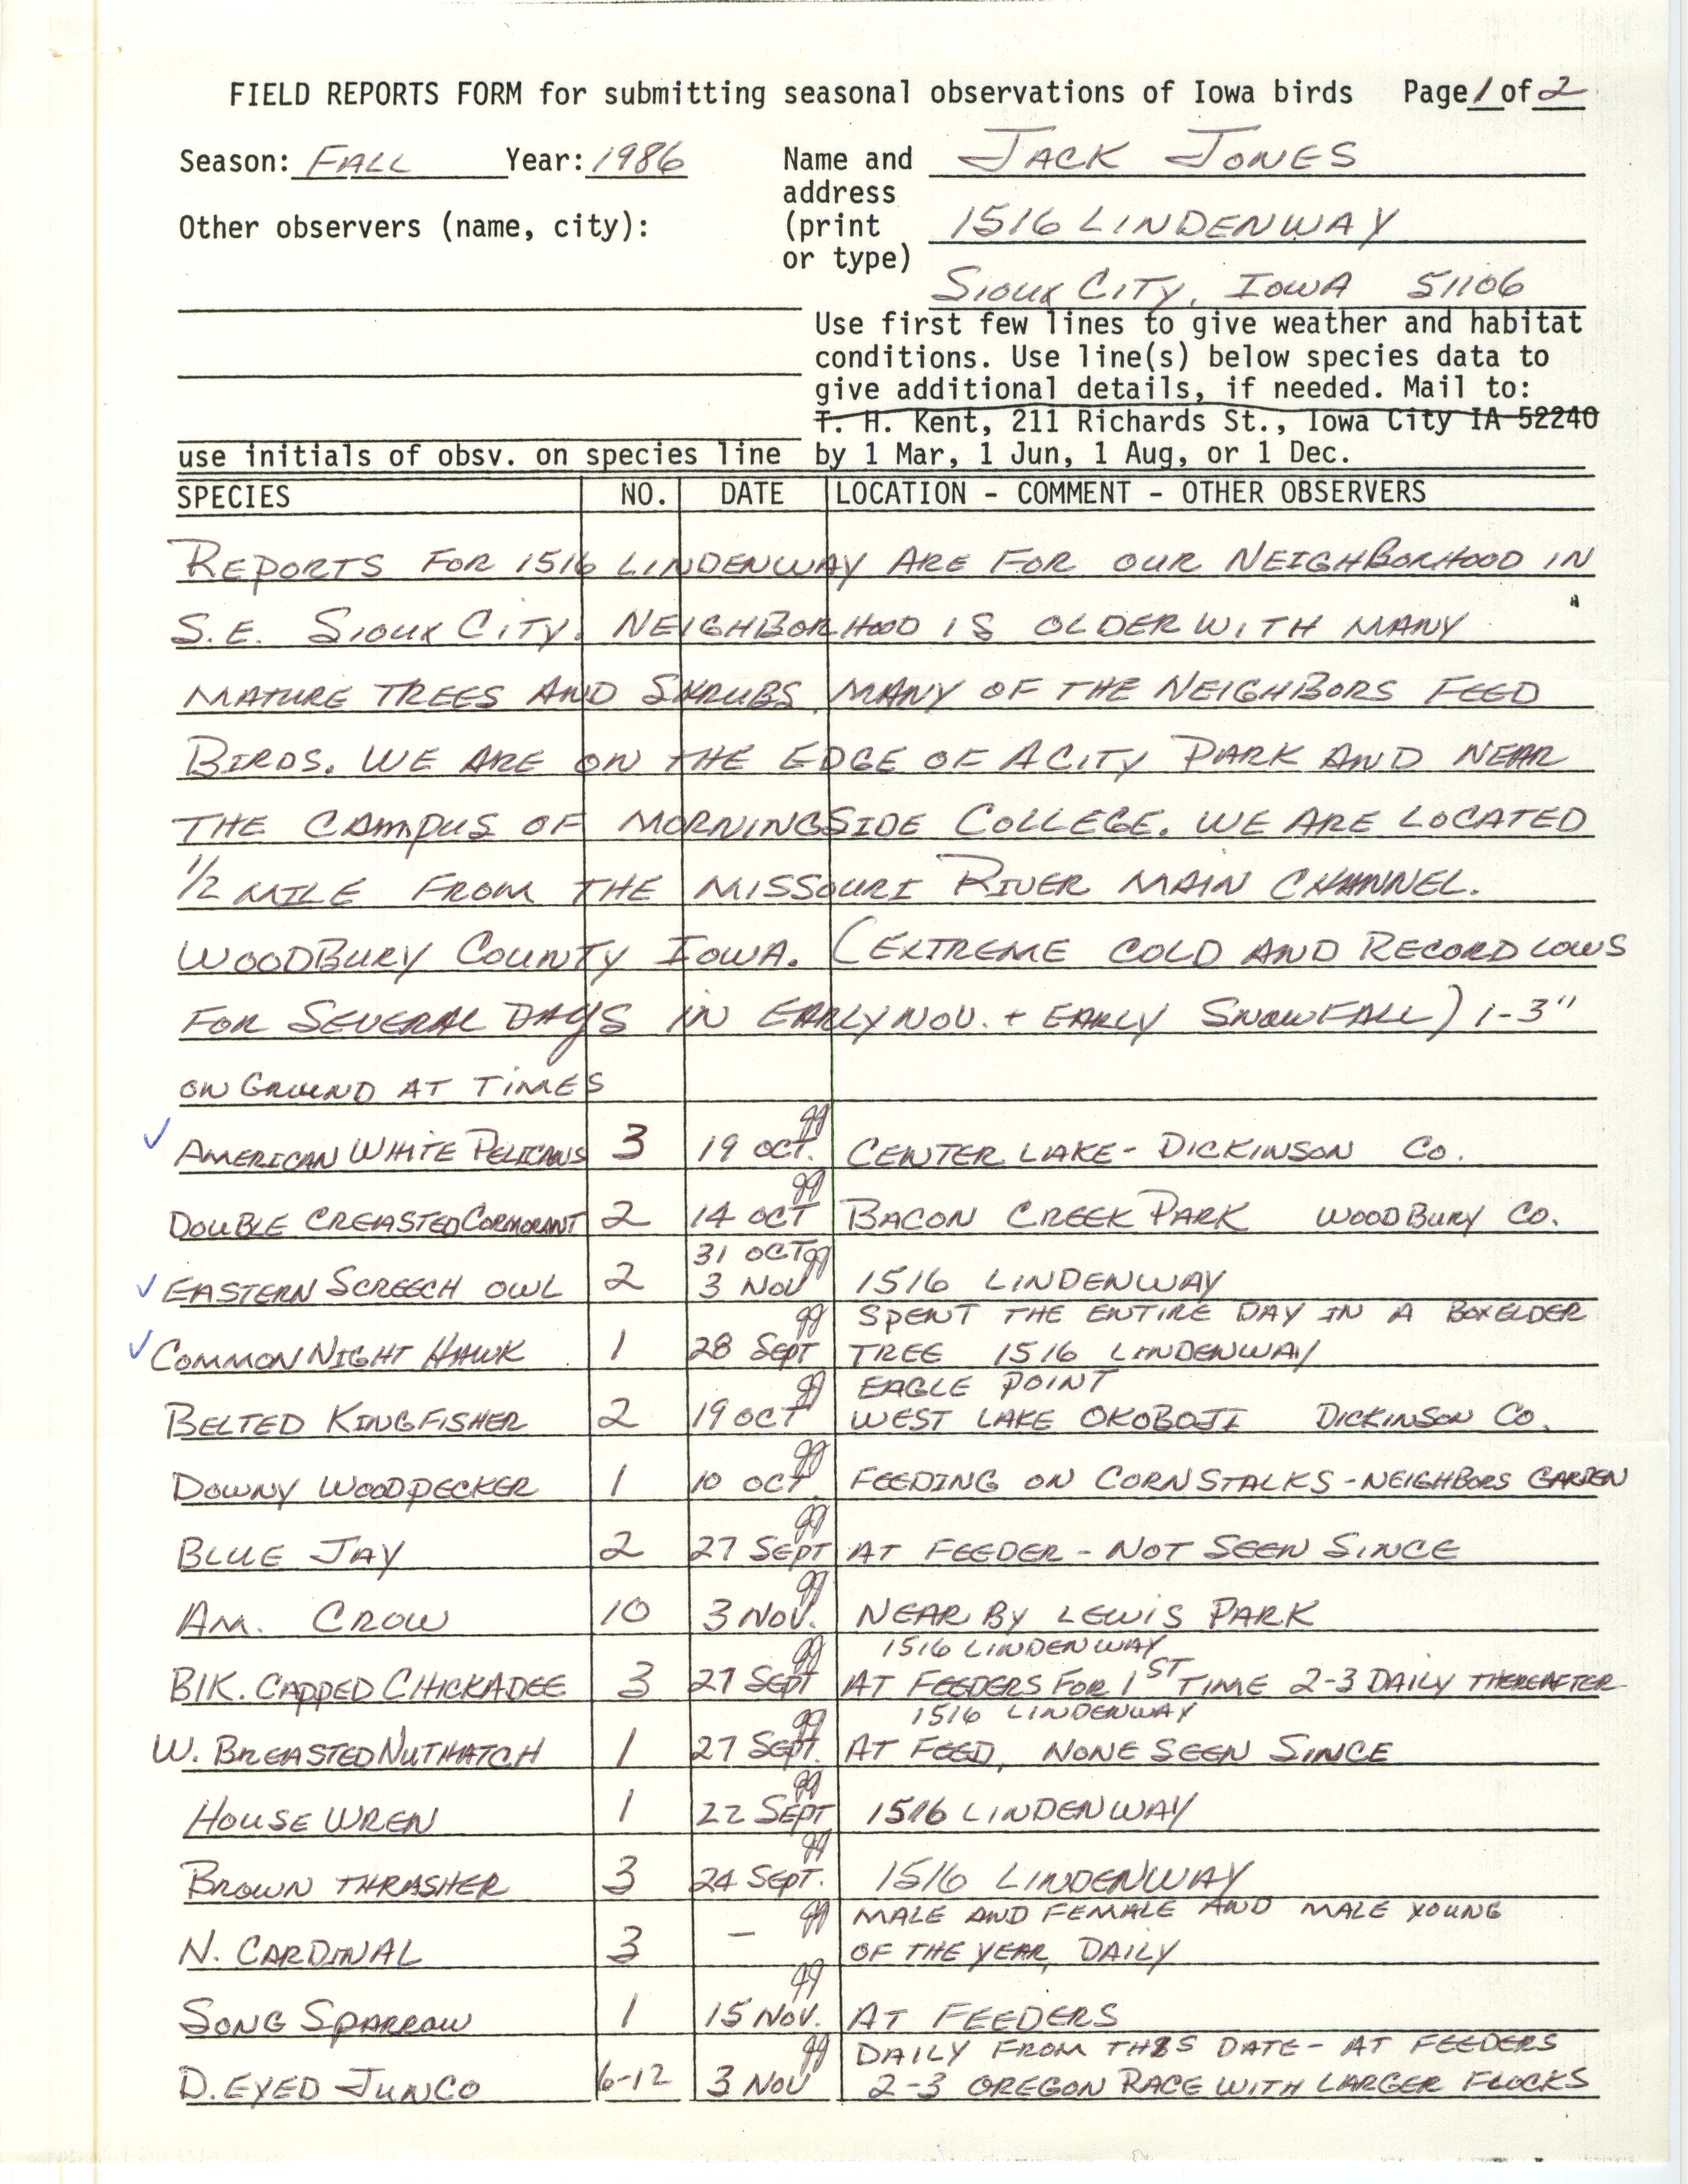 Field reports form for submitting seasonal observations of Iowa birds, Jack Jones, fall 1986